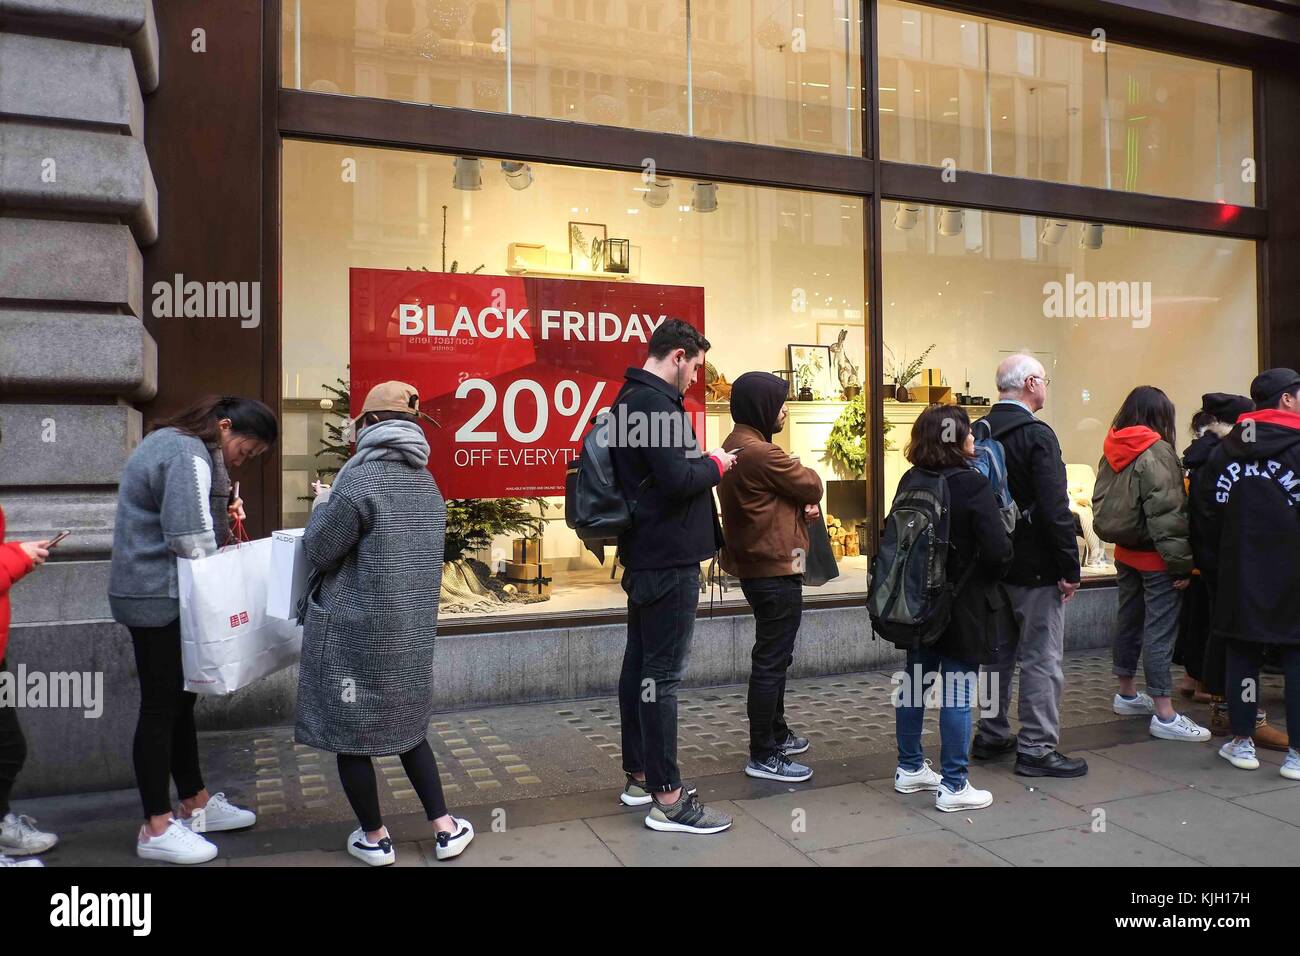 London, UK. 24th Nov, 2017. Eager black friday shoppers queue outside Uniqlo  an H&M on Oxford Street before the stores opens at 8am. : Credit: claire  doherty/Alamy Live News Stock Photo - Alamy